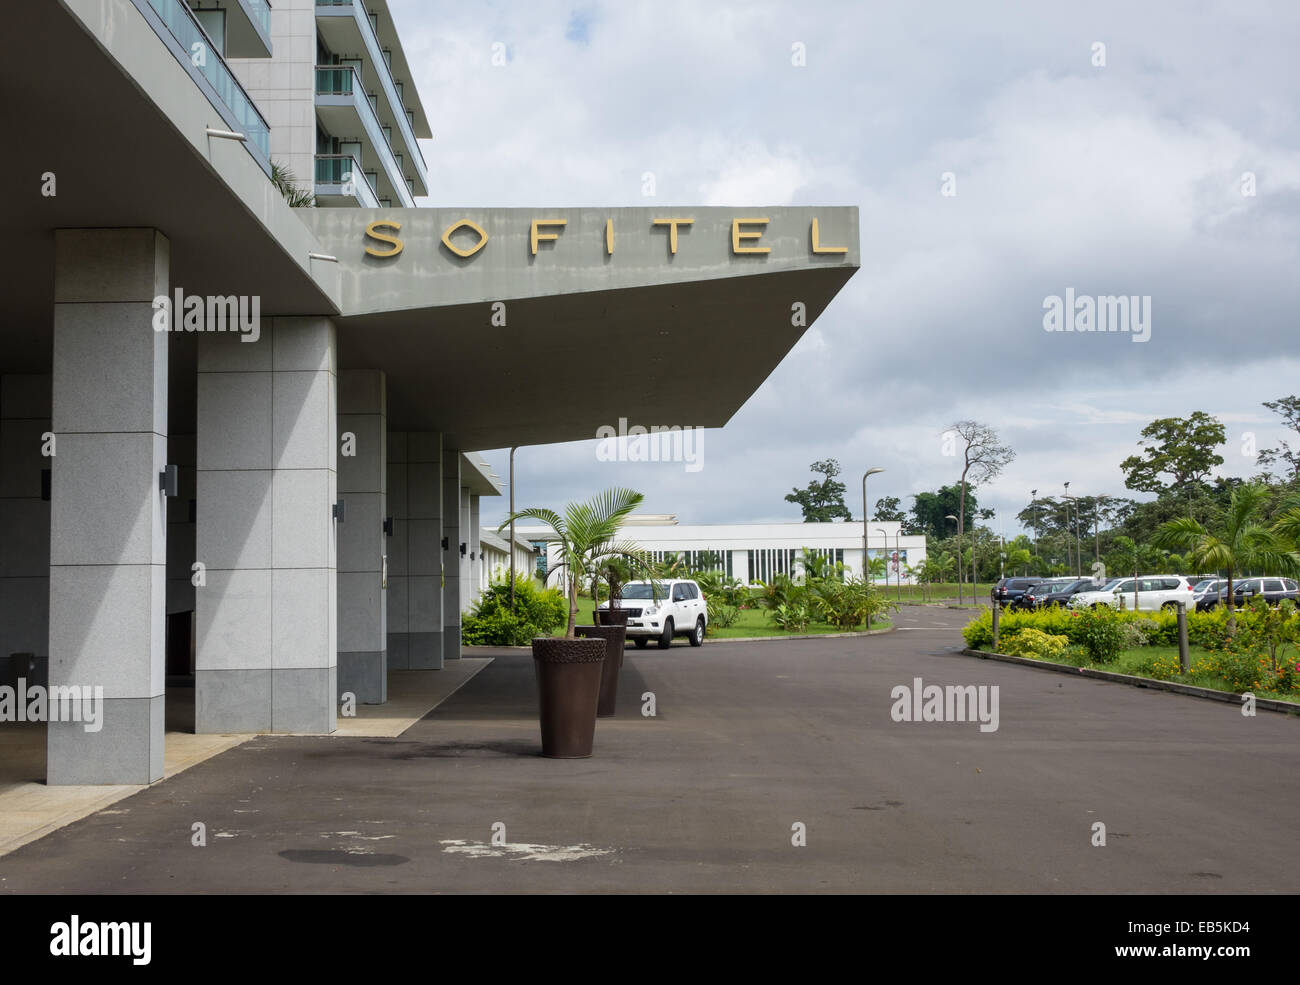 Sofitel Hotel building and entrance in Sipopo near the capital city of Malabo, Equatorial Guinea, Africa Stock Photo